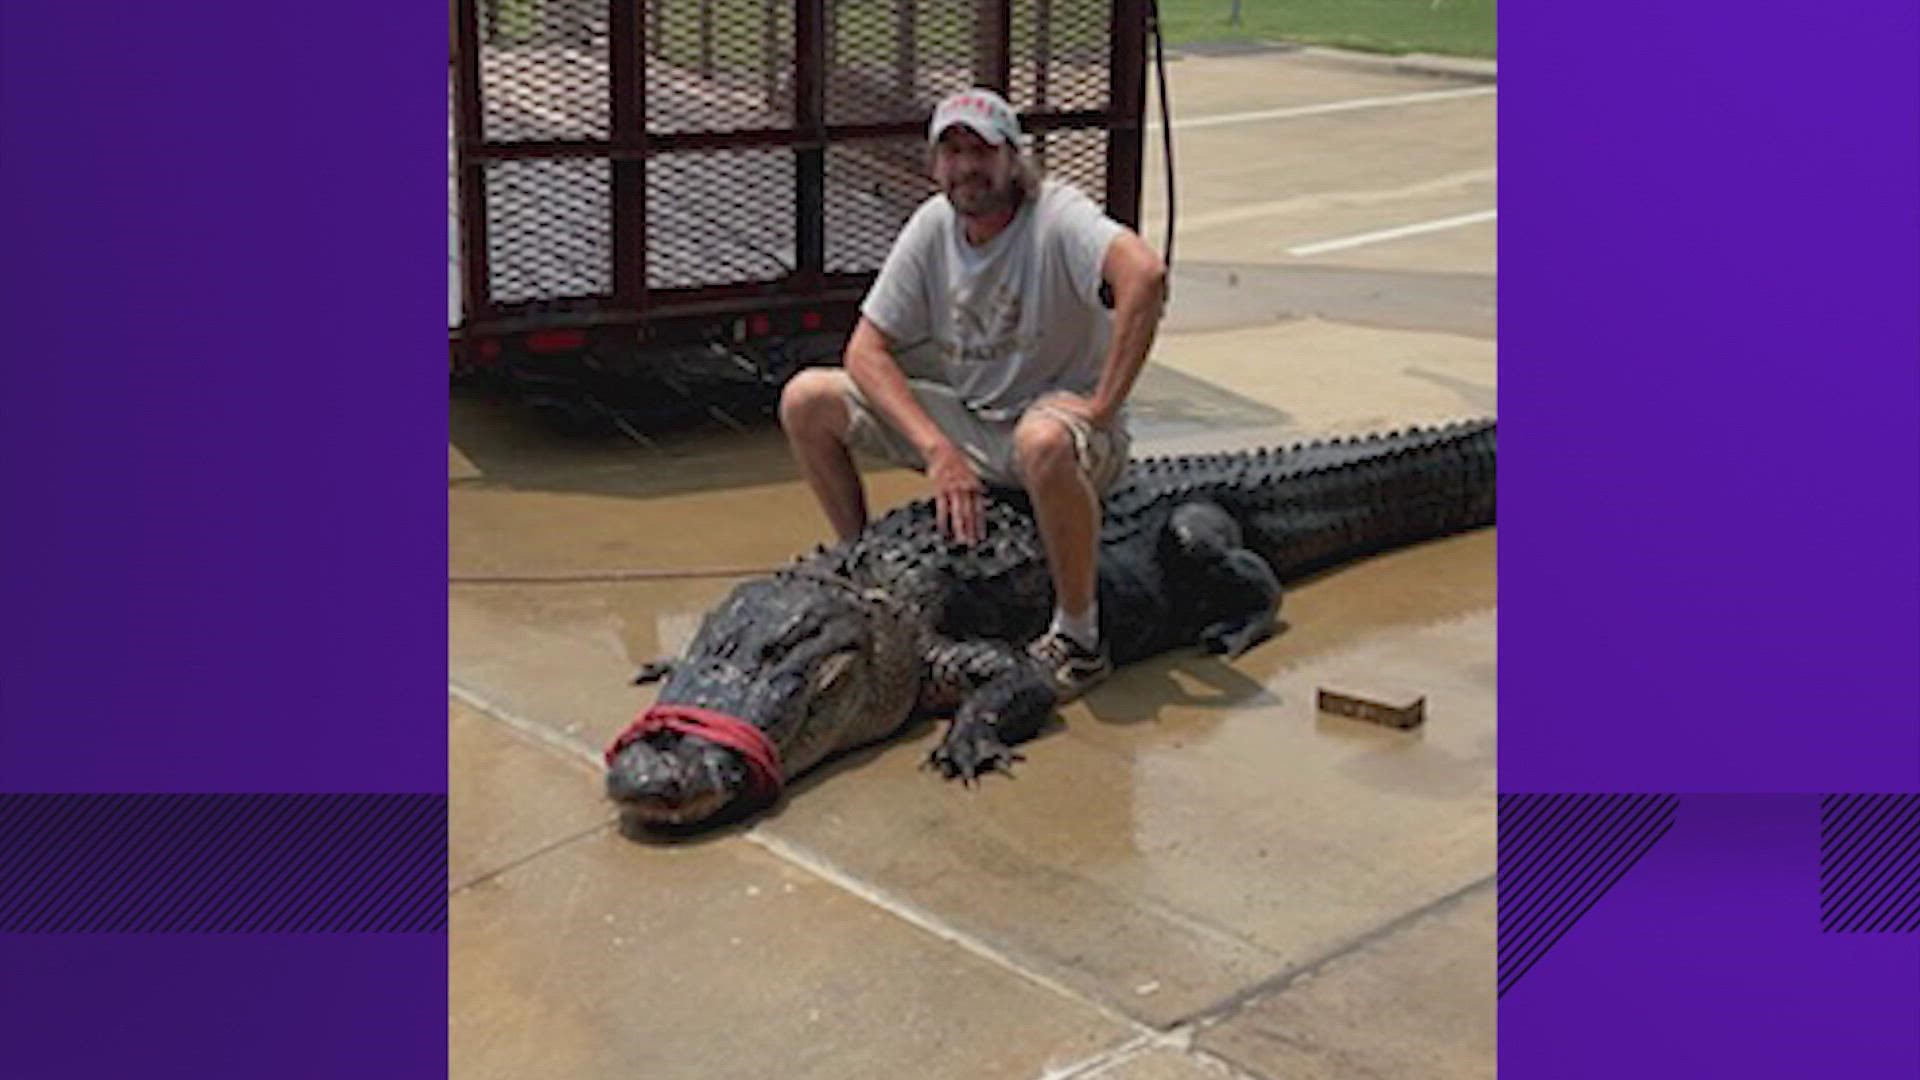 The La Porte Police Department found the gator near a park and had it relocated.